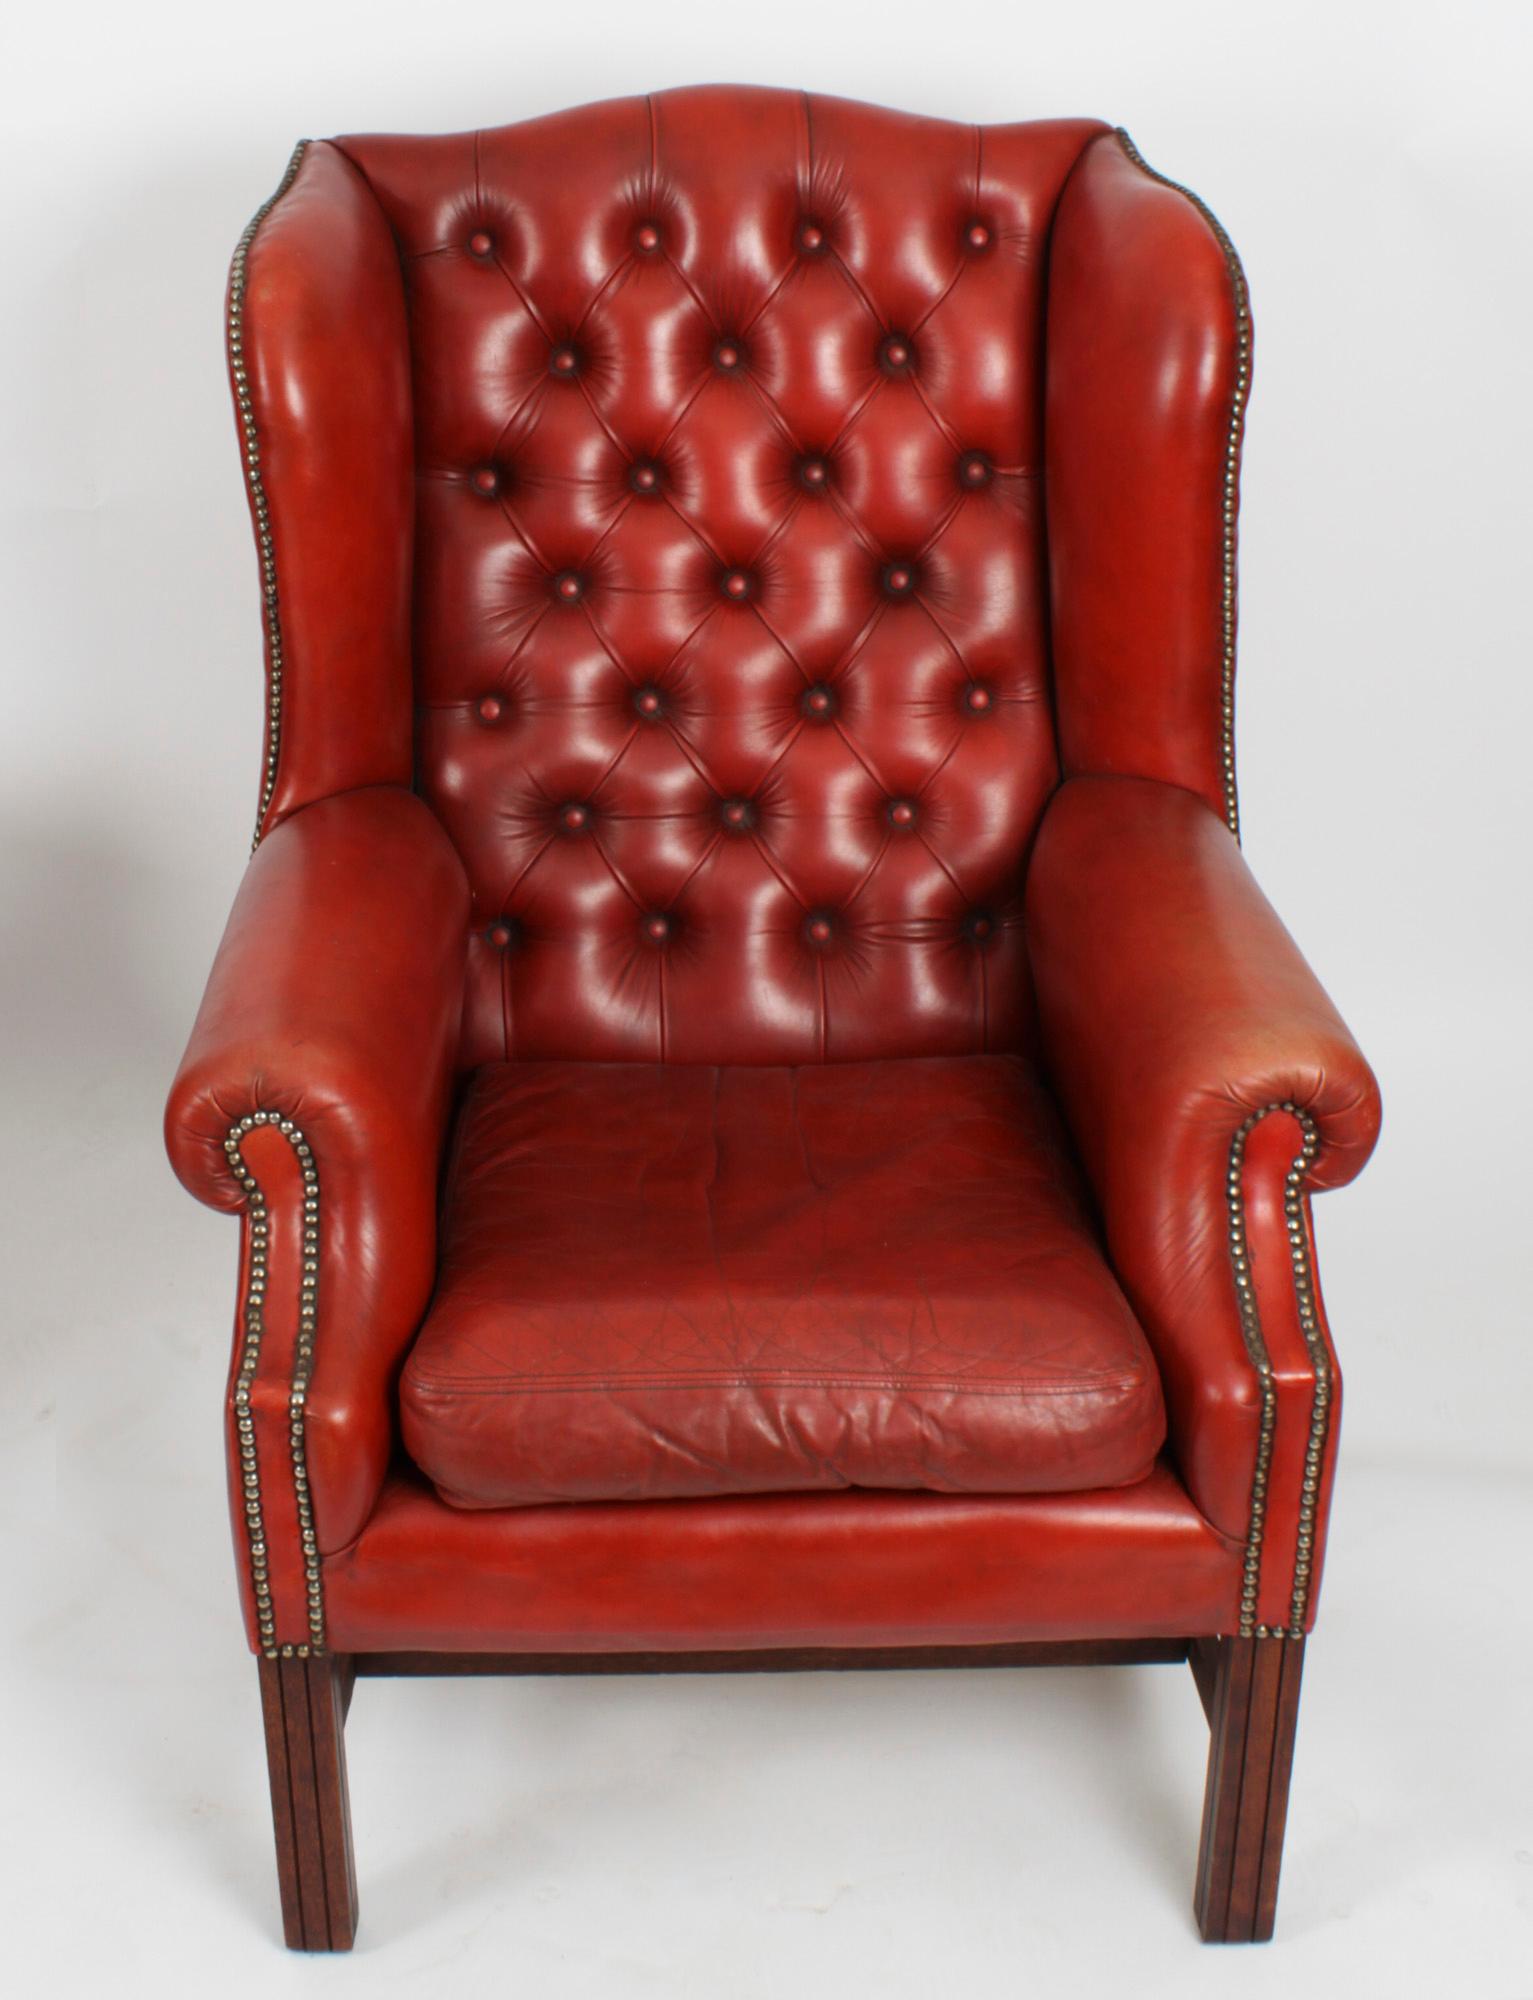 This is an excellent vintage pair of English handmade red leather button backed wingback armchairs, dating from the late 20th century.

They have deep buttoned backs, swept shaped sides and loose cushion seats, and they are raised on square